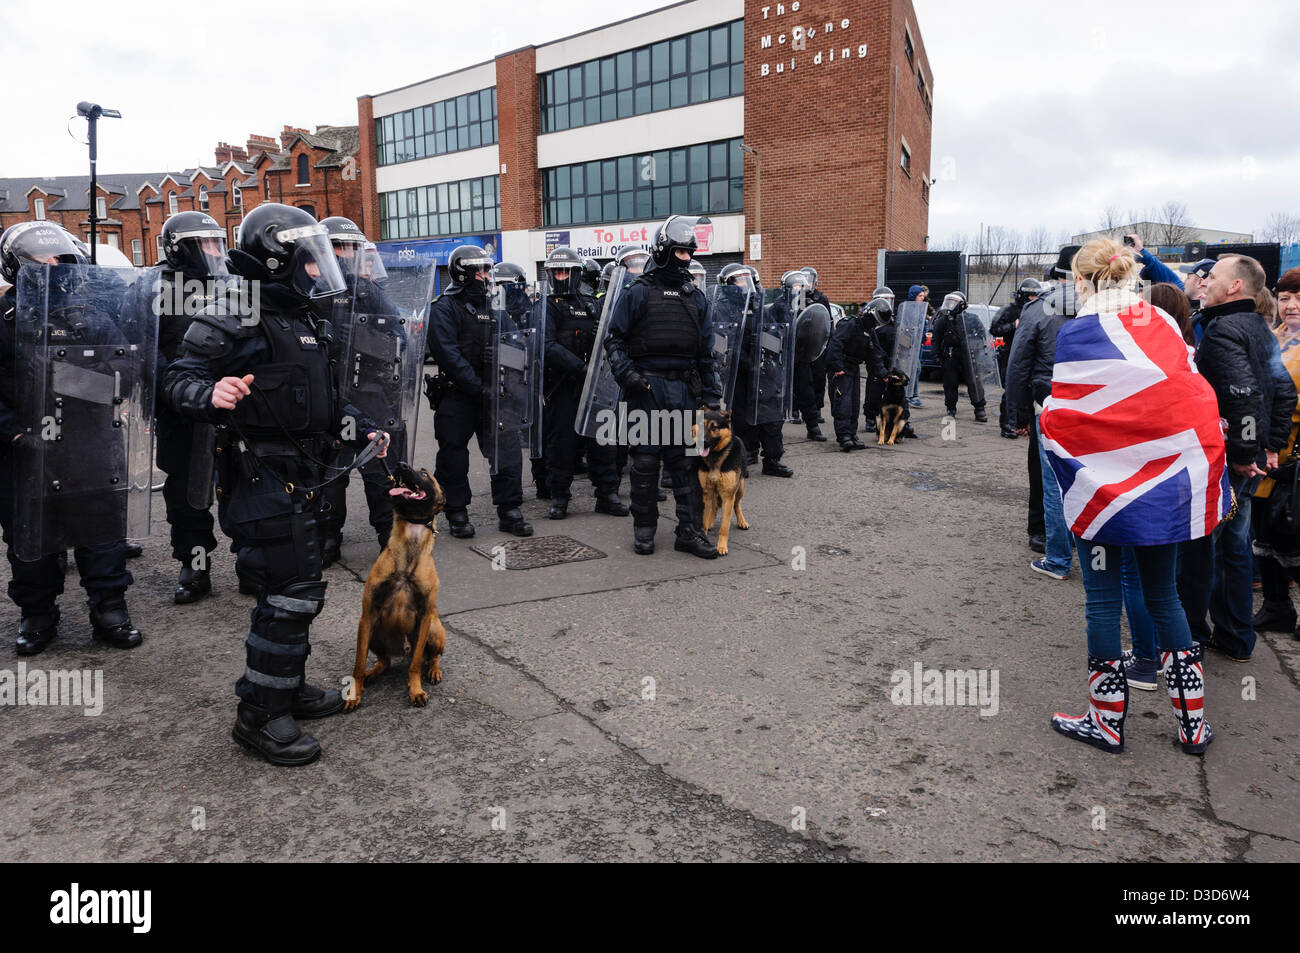 16th February 2013. Belfast, Northern Ireland.  Police bring out attack dogs to try to disperse a crowd of protestersf. Credit: Stephen Barnes/Alamy Live News Stock Photo